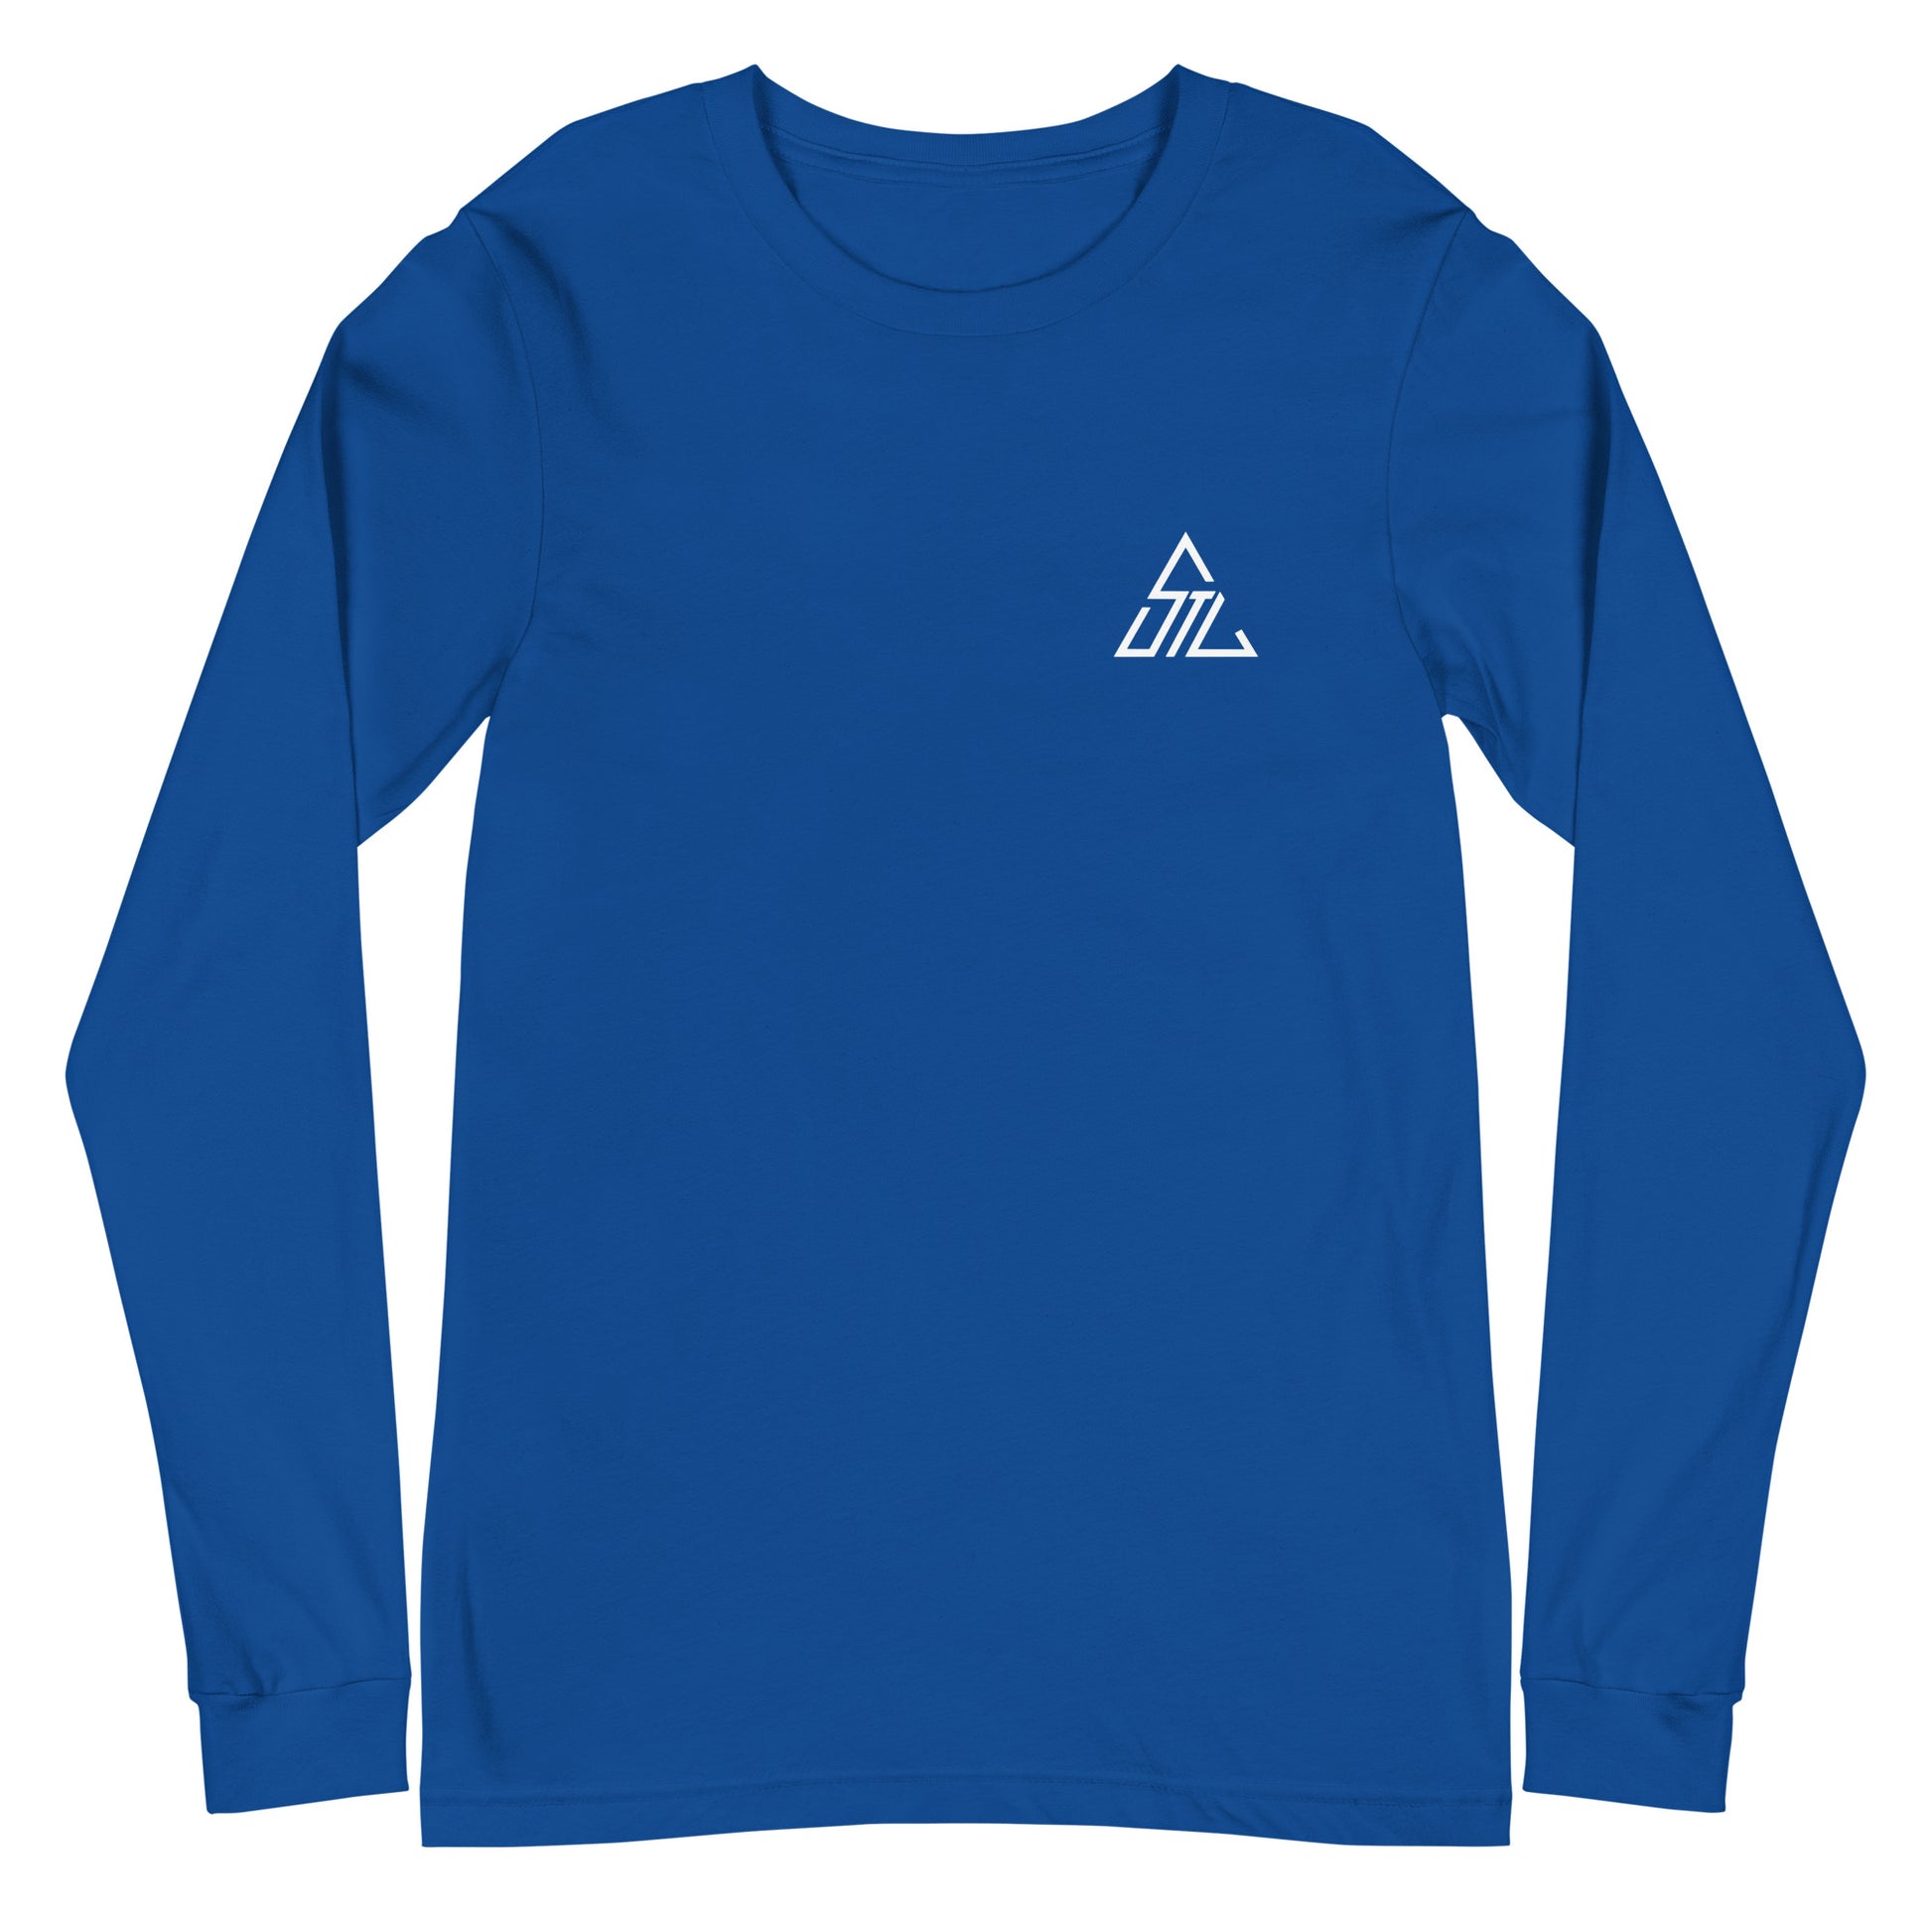 Two More Skip The Last "Bluebird" royal unisex Long sleeve t-shirt. Front view